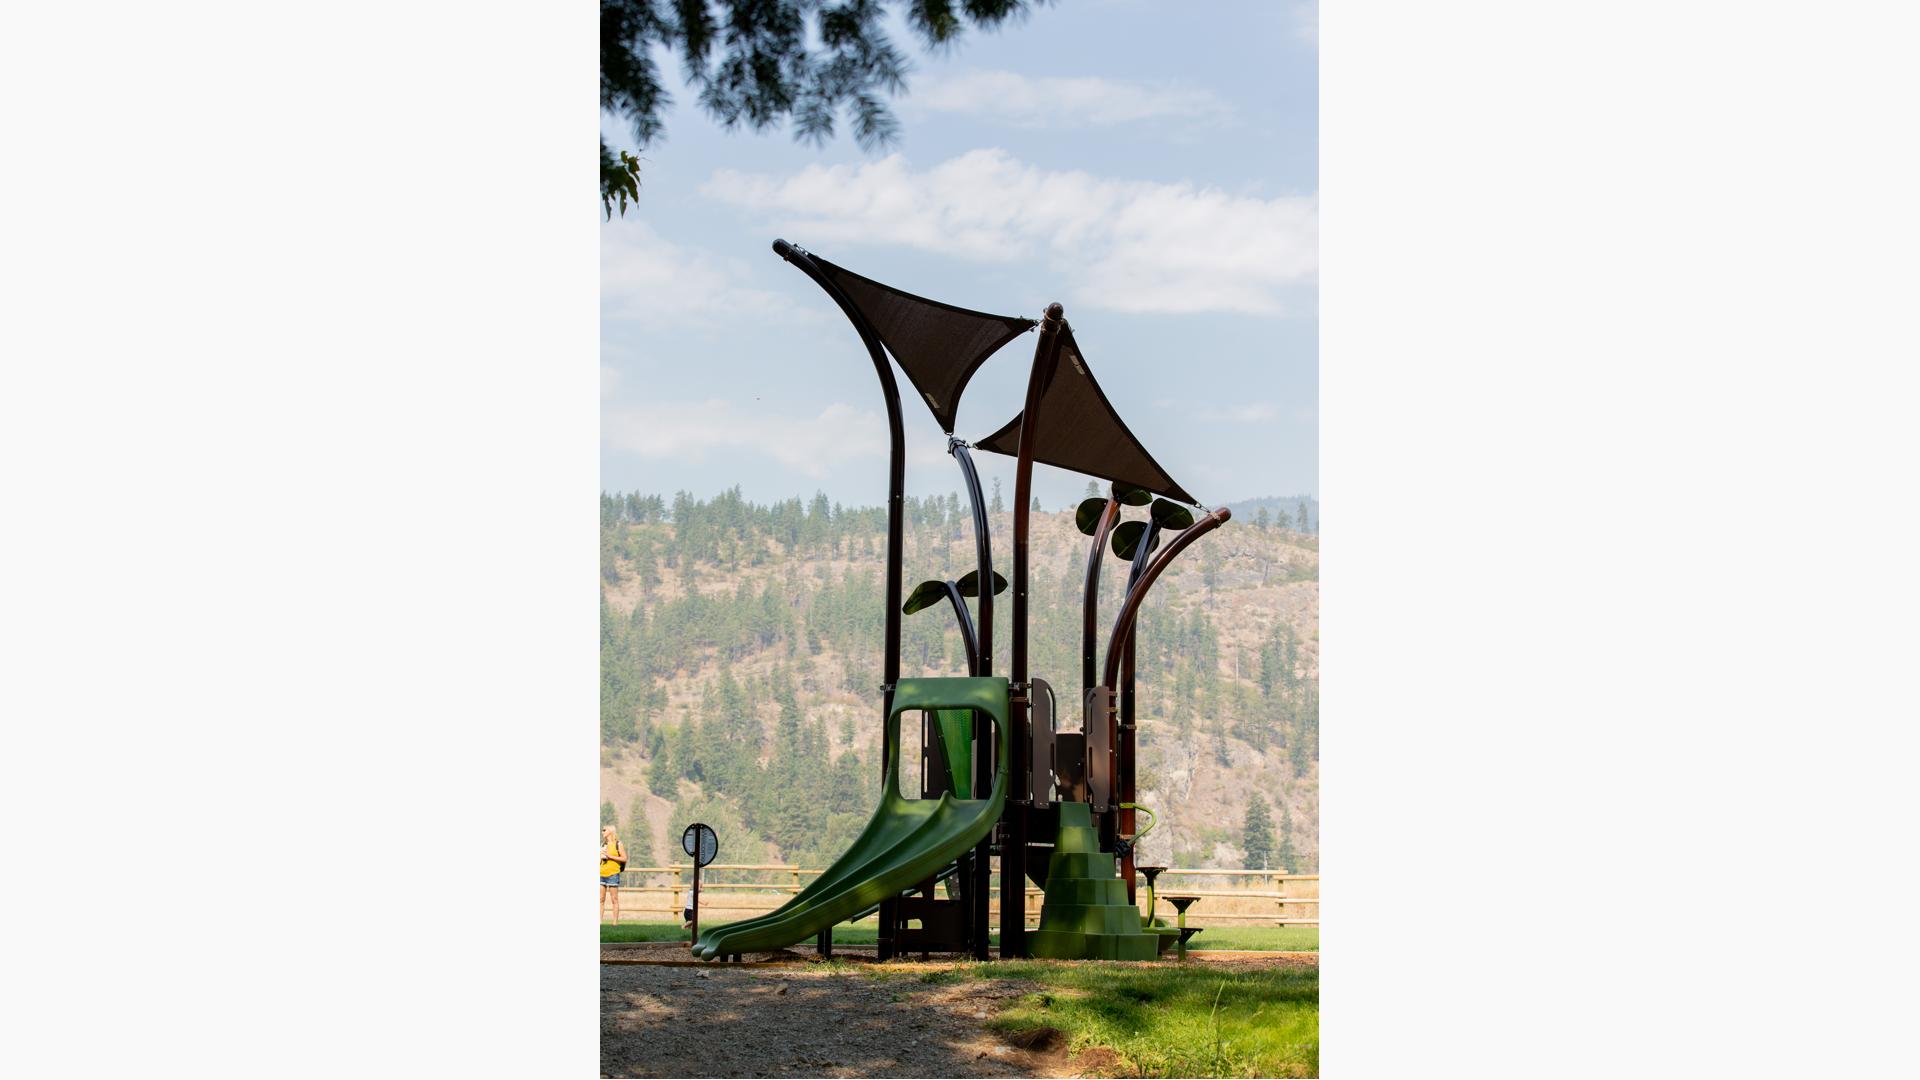 Playshaper playscape at Fintry Provincial park, Vernon, BC CA